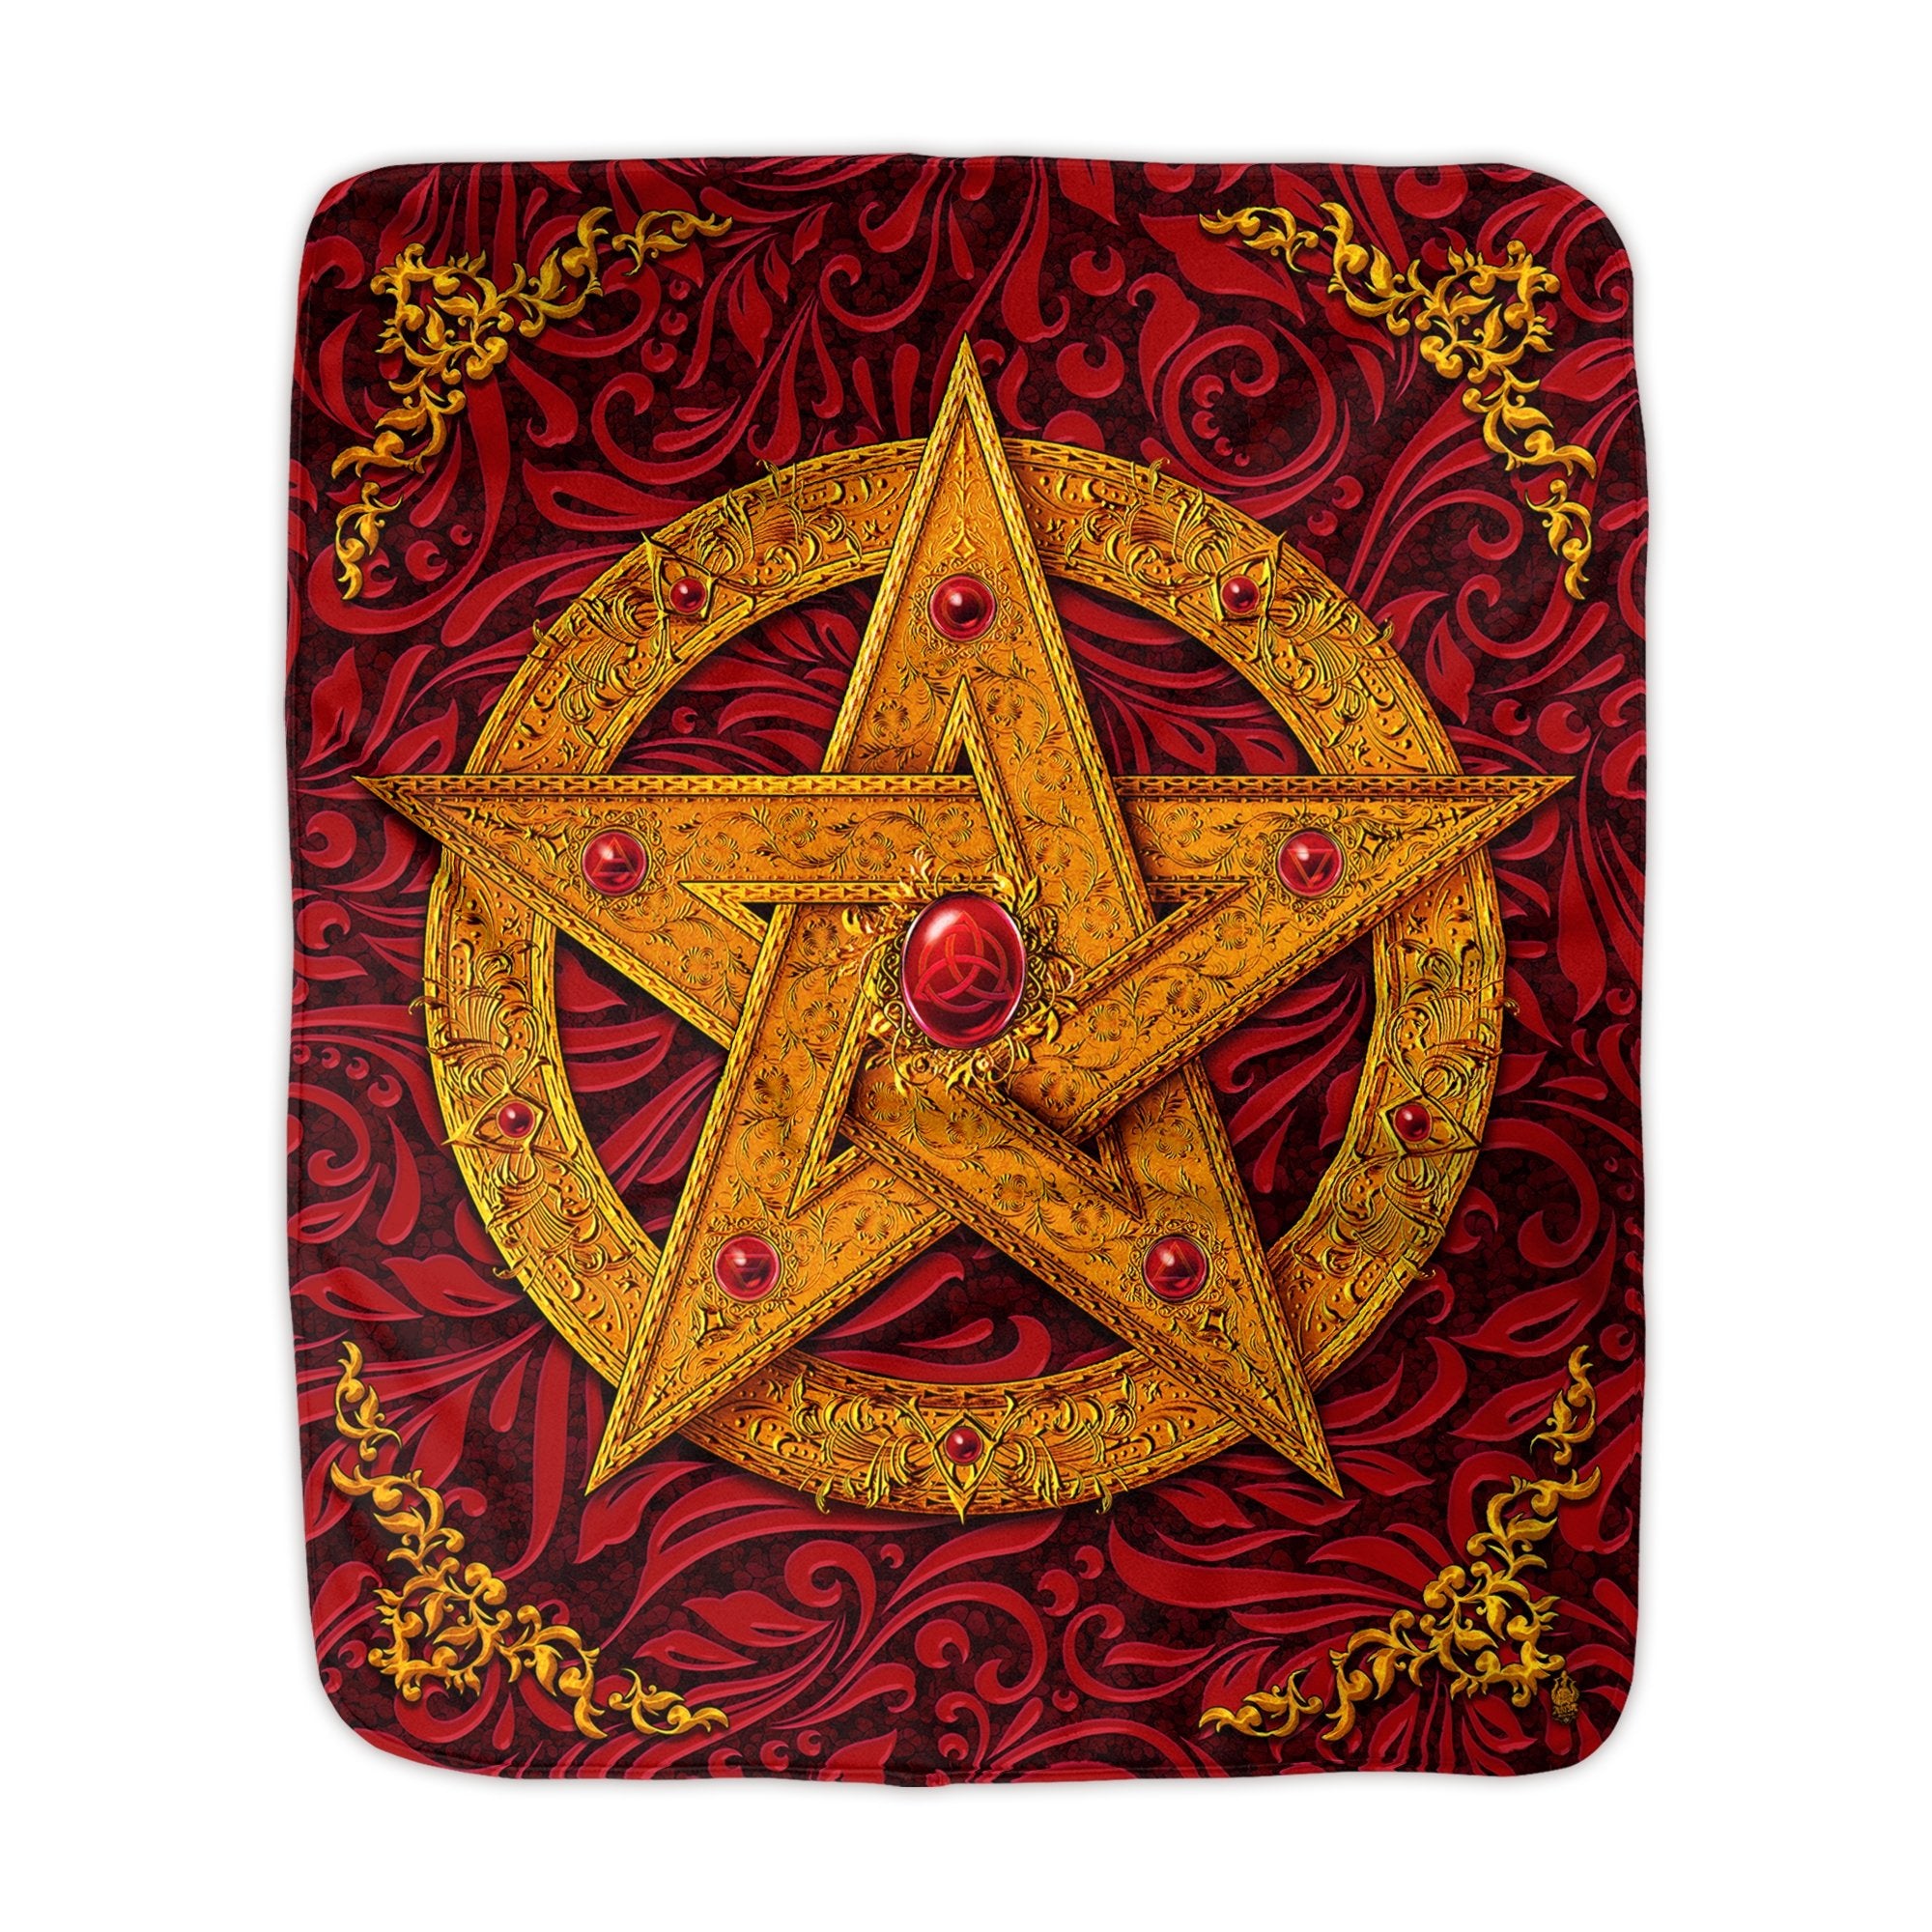 Pentacle Throw Fleece Blanket, Wicca and Pagan Decor, Witchy Room - Red - Abysm Internal